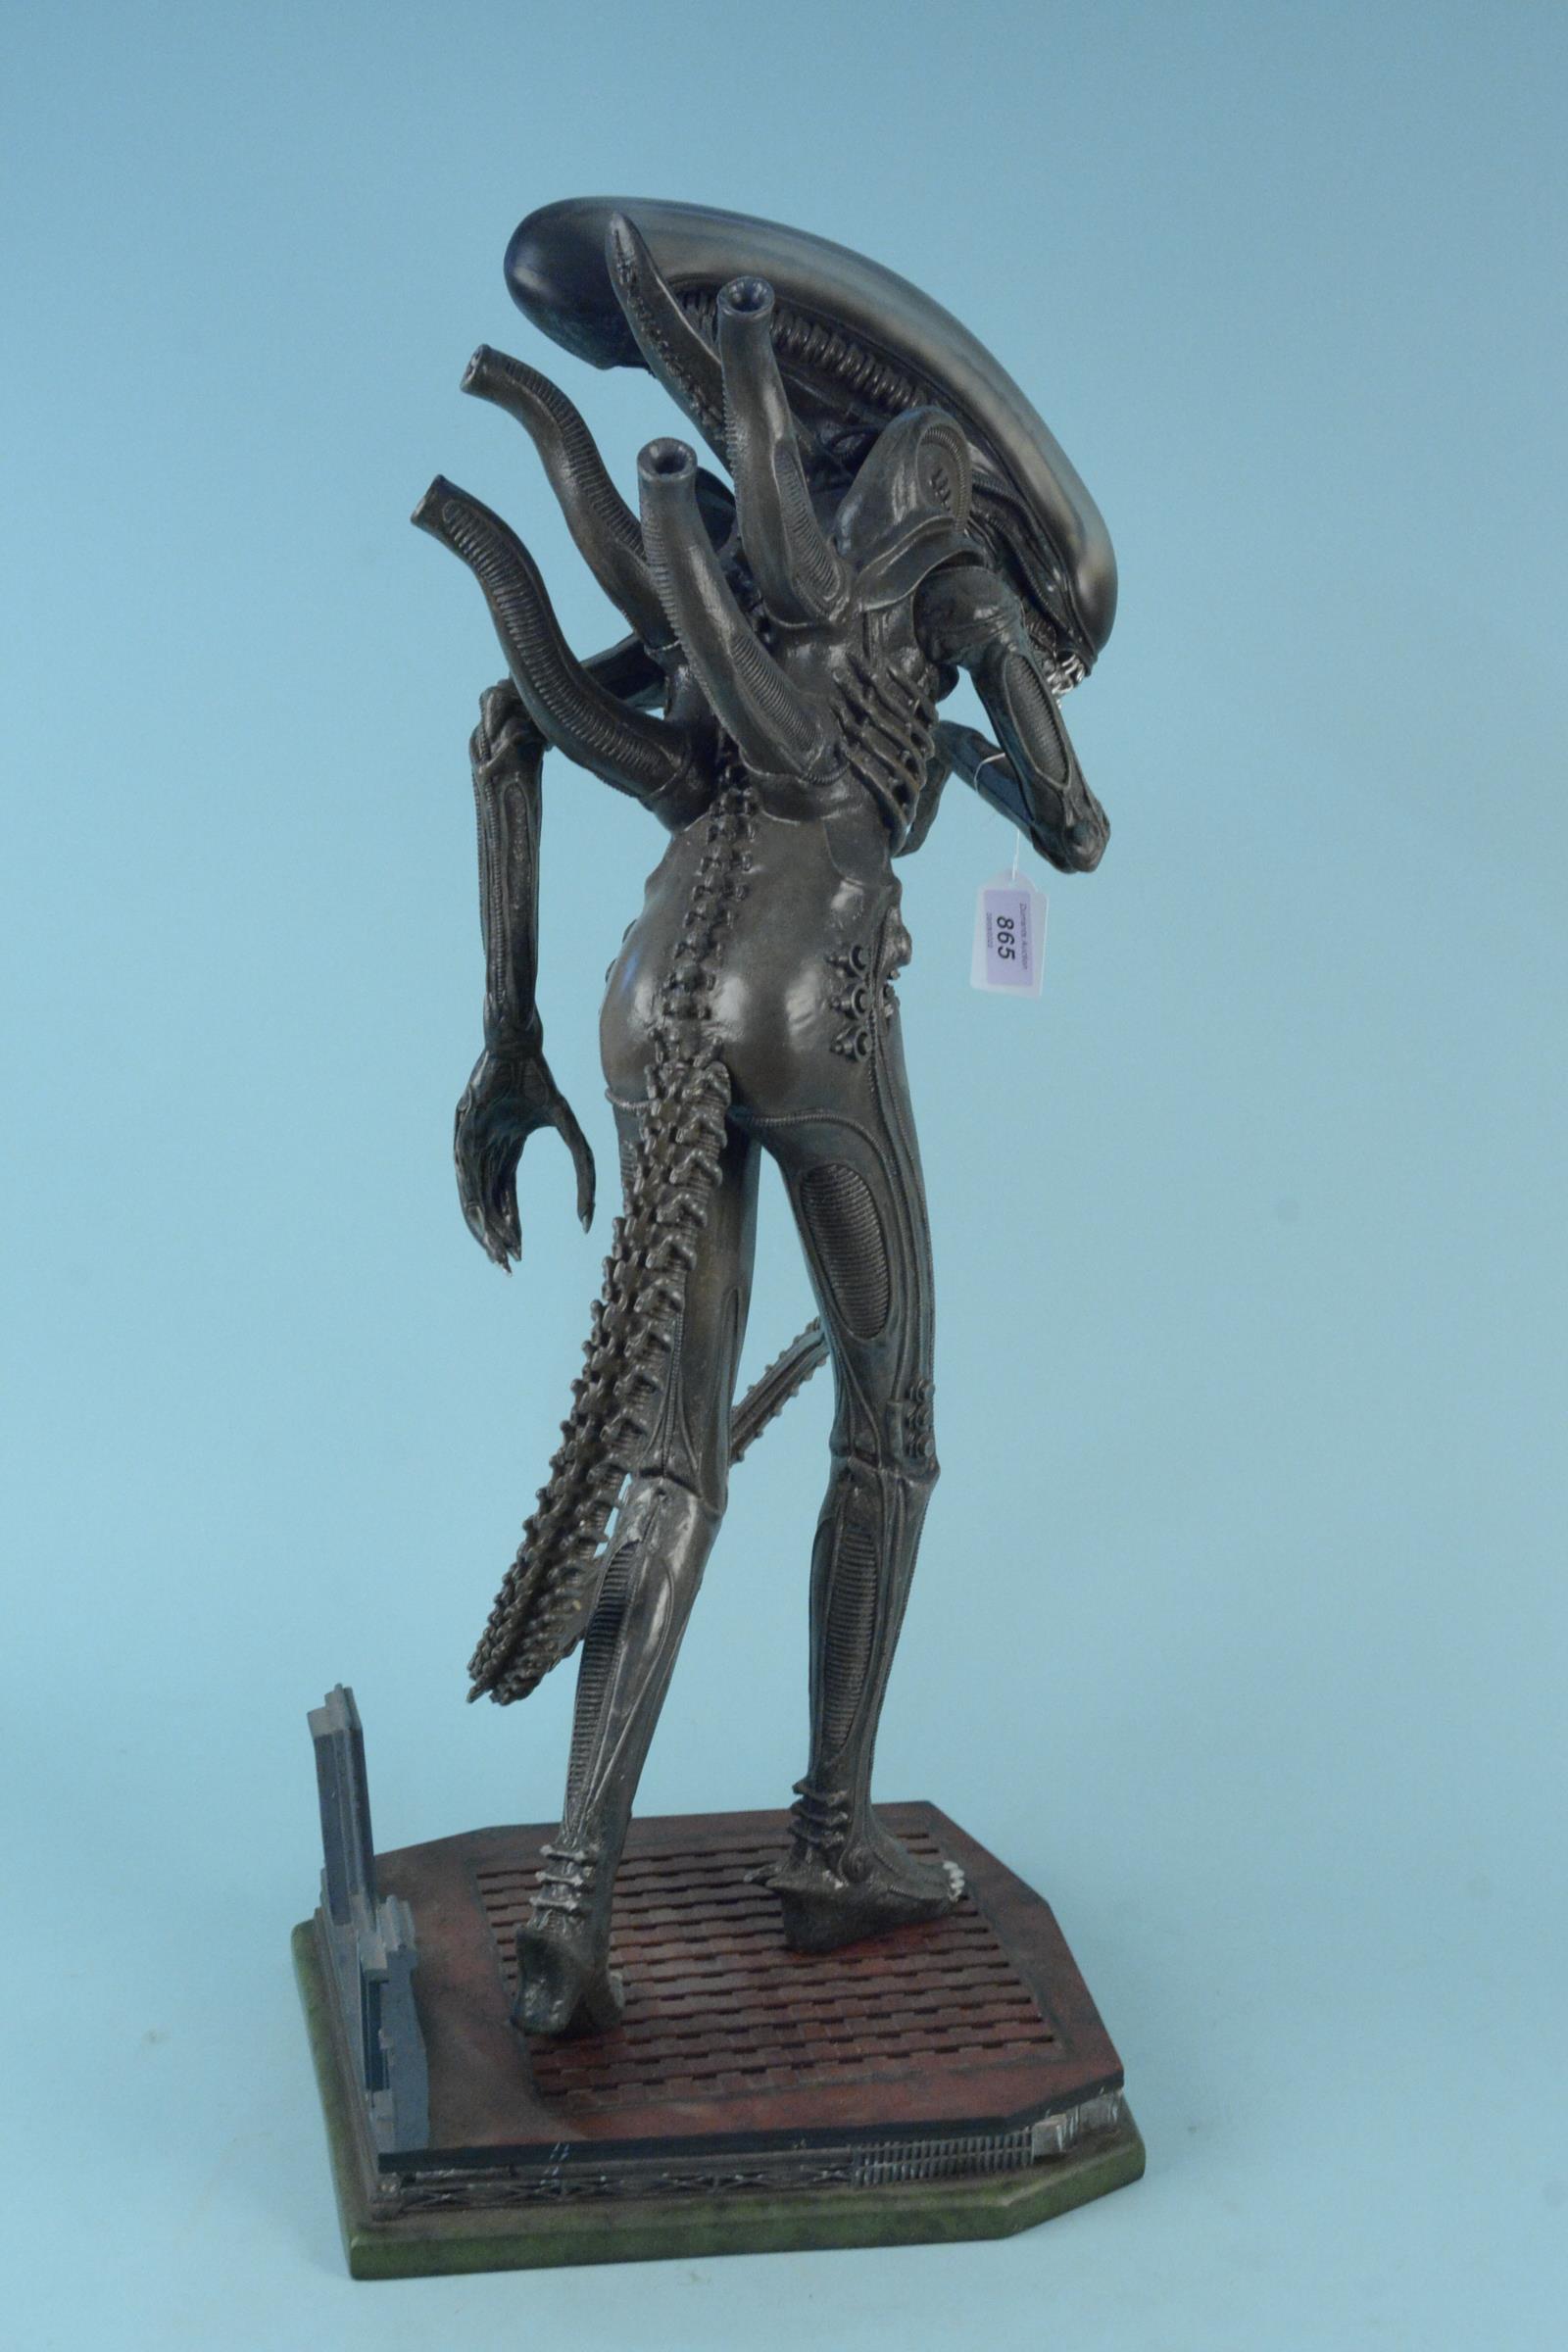 A boxed limited edition 'Big Chap' Maquette alien figure Sideshow Collectables, 1:4 scale, - Image 3 of 4